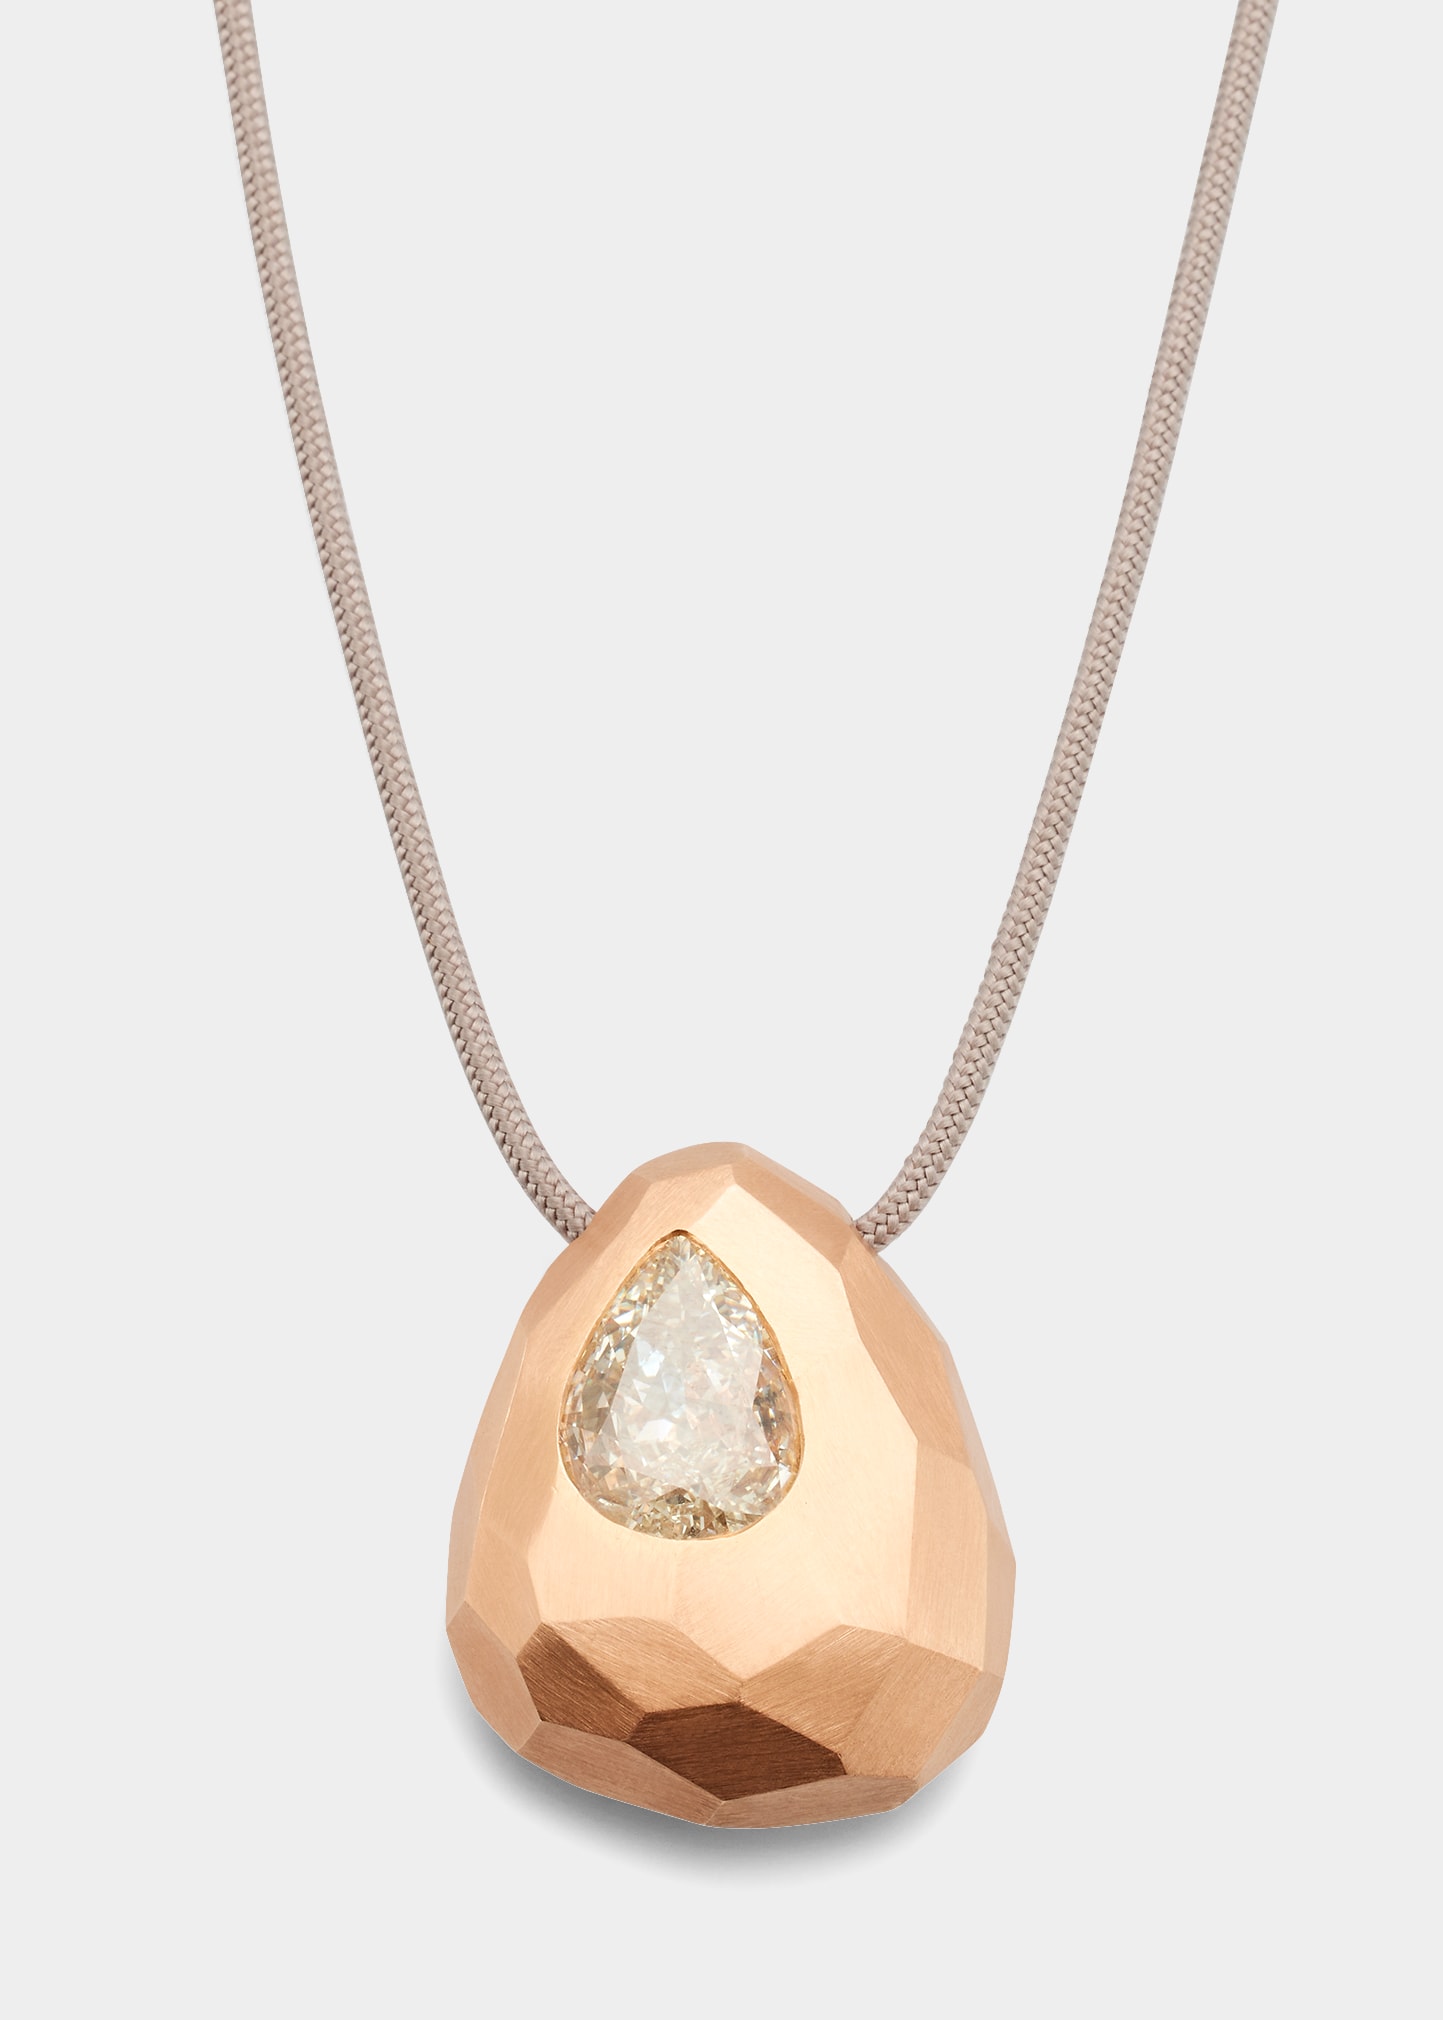 Pebble Necklace in Rose Gold with a Pear Shaped Diamond